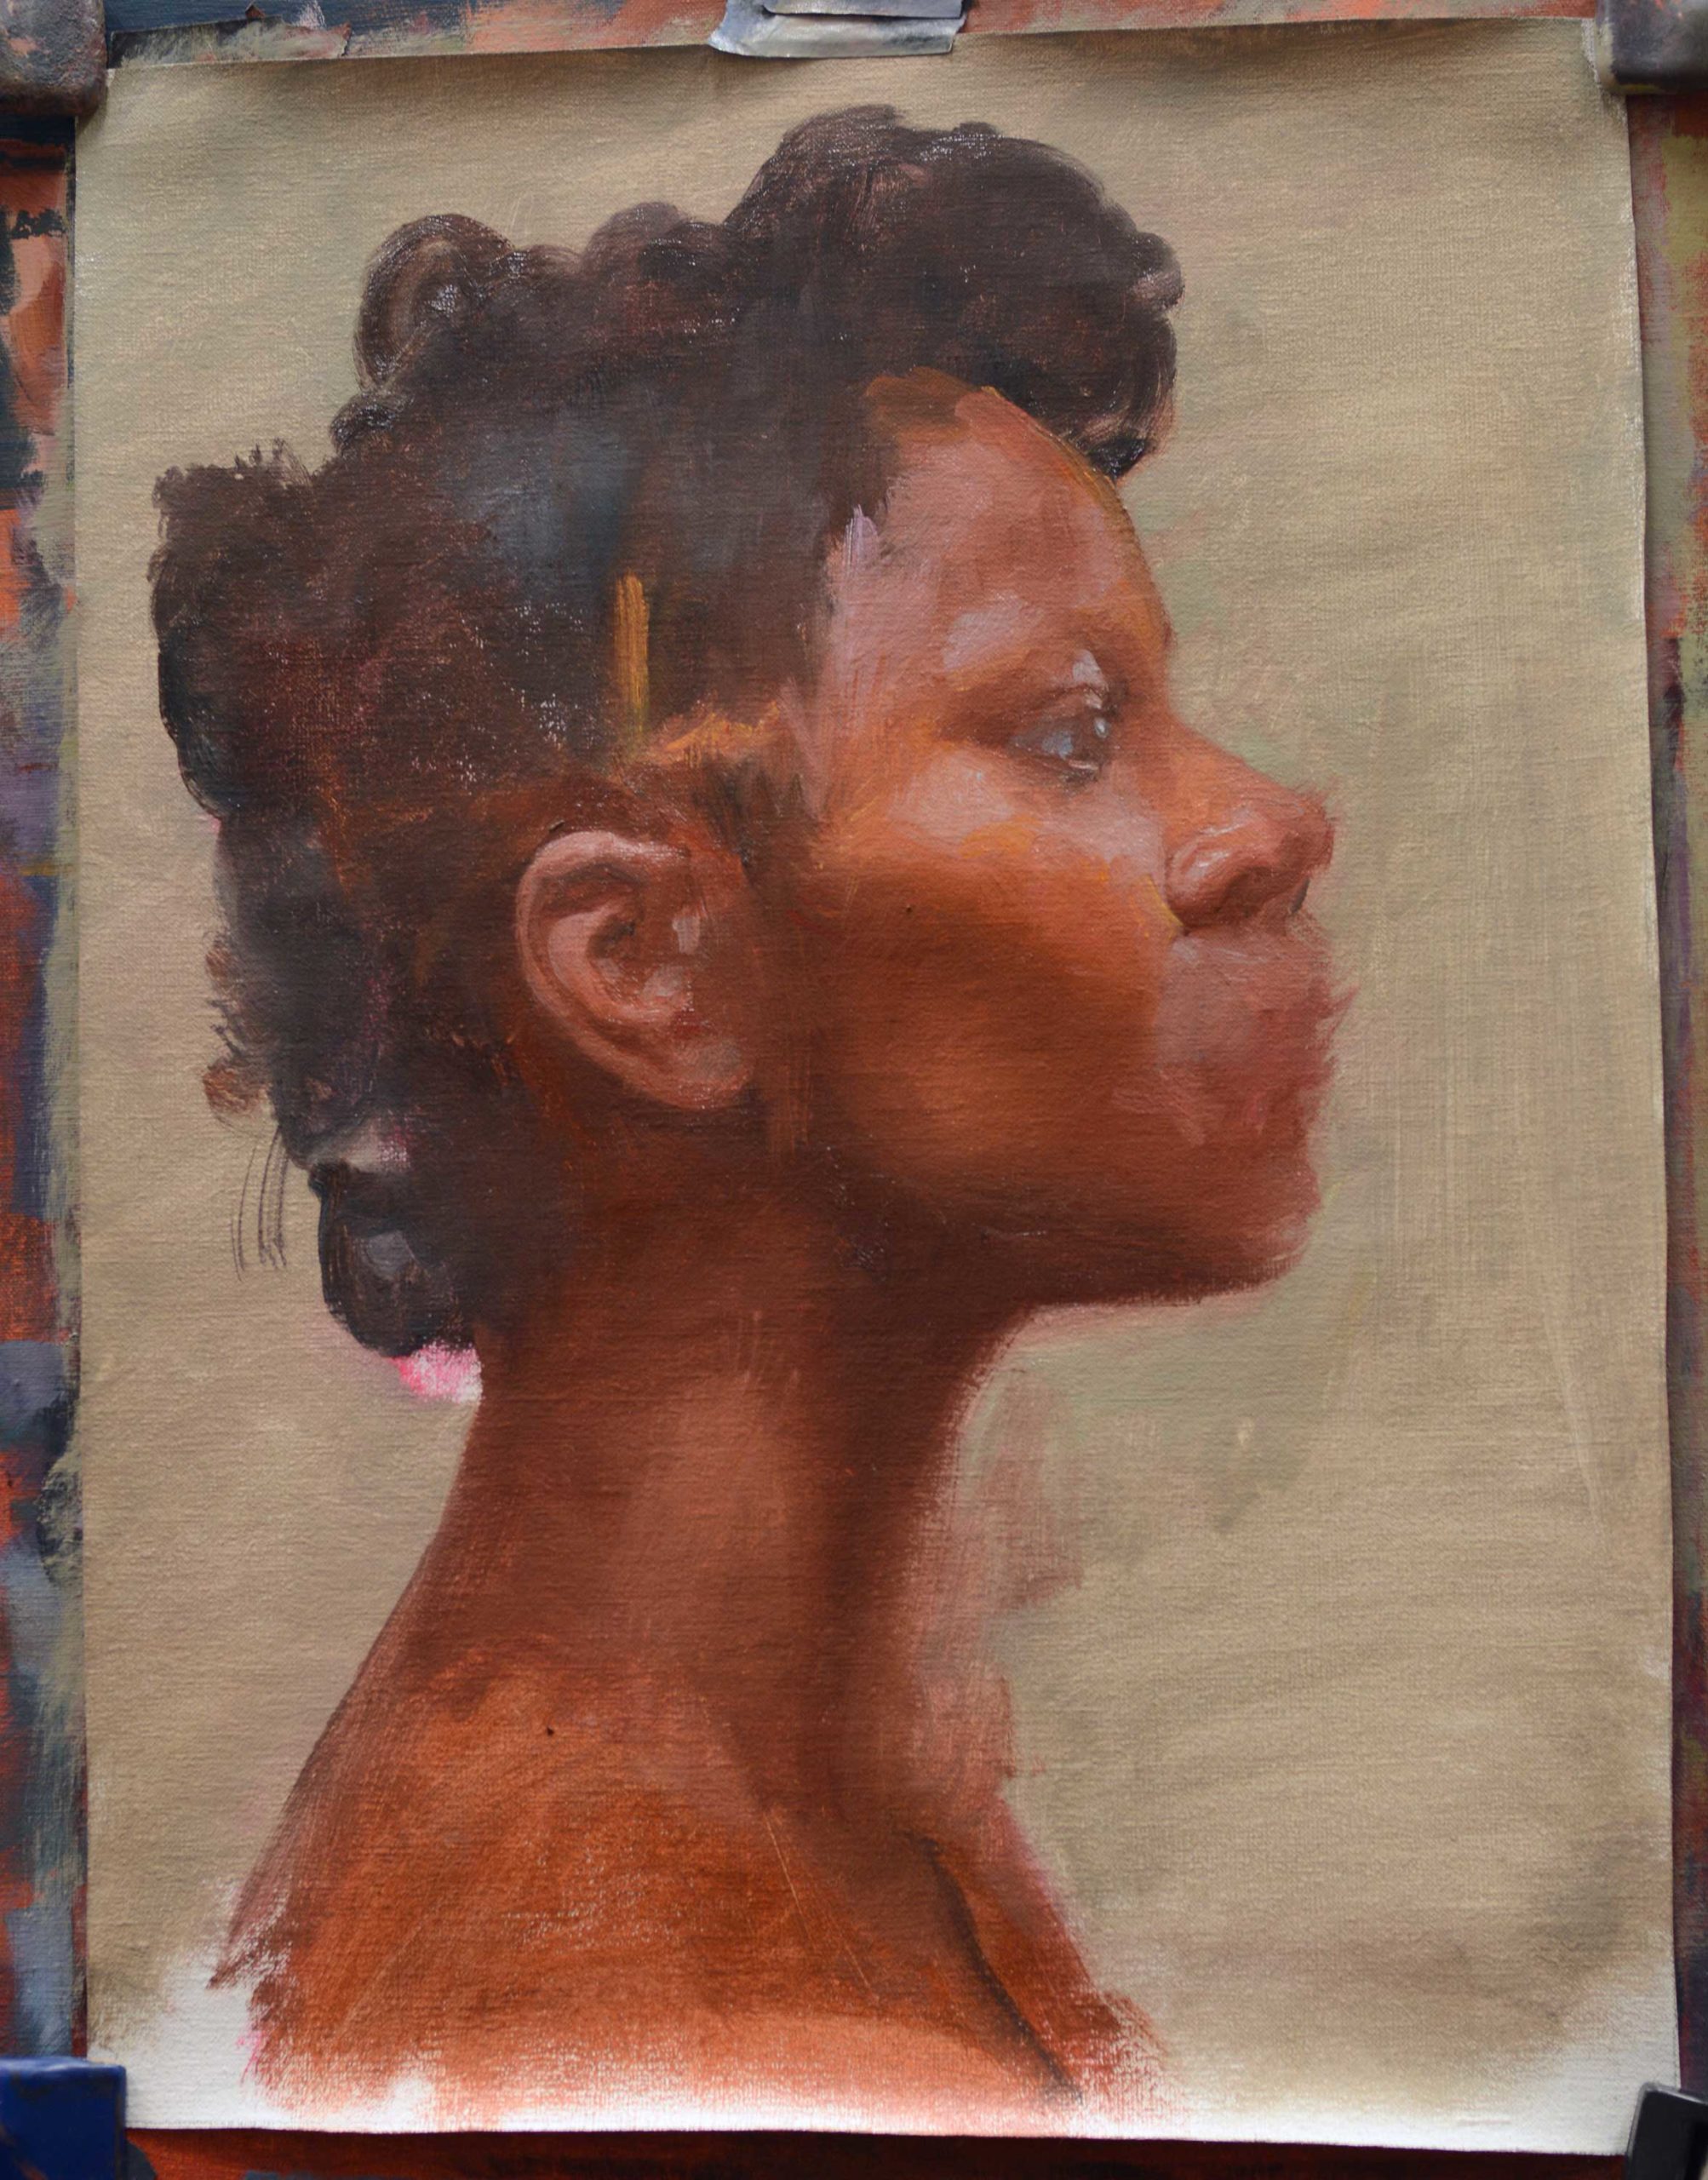 Refining and start building a likeness in an oil painted portrait of a head in profile